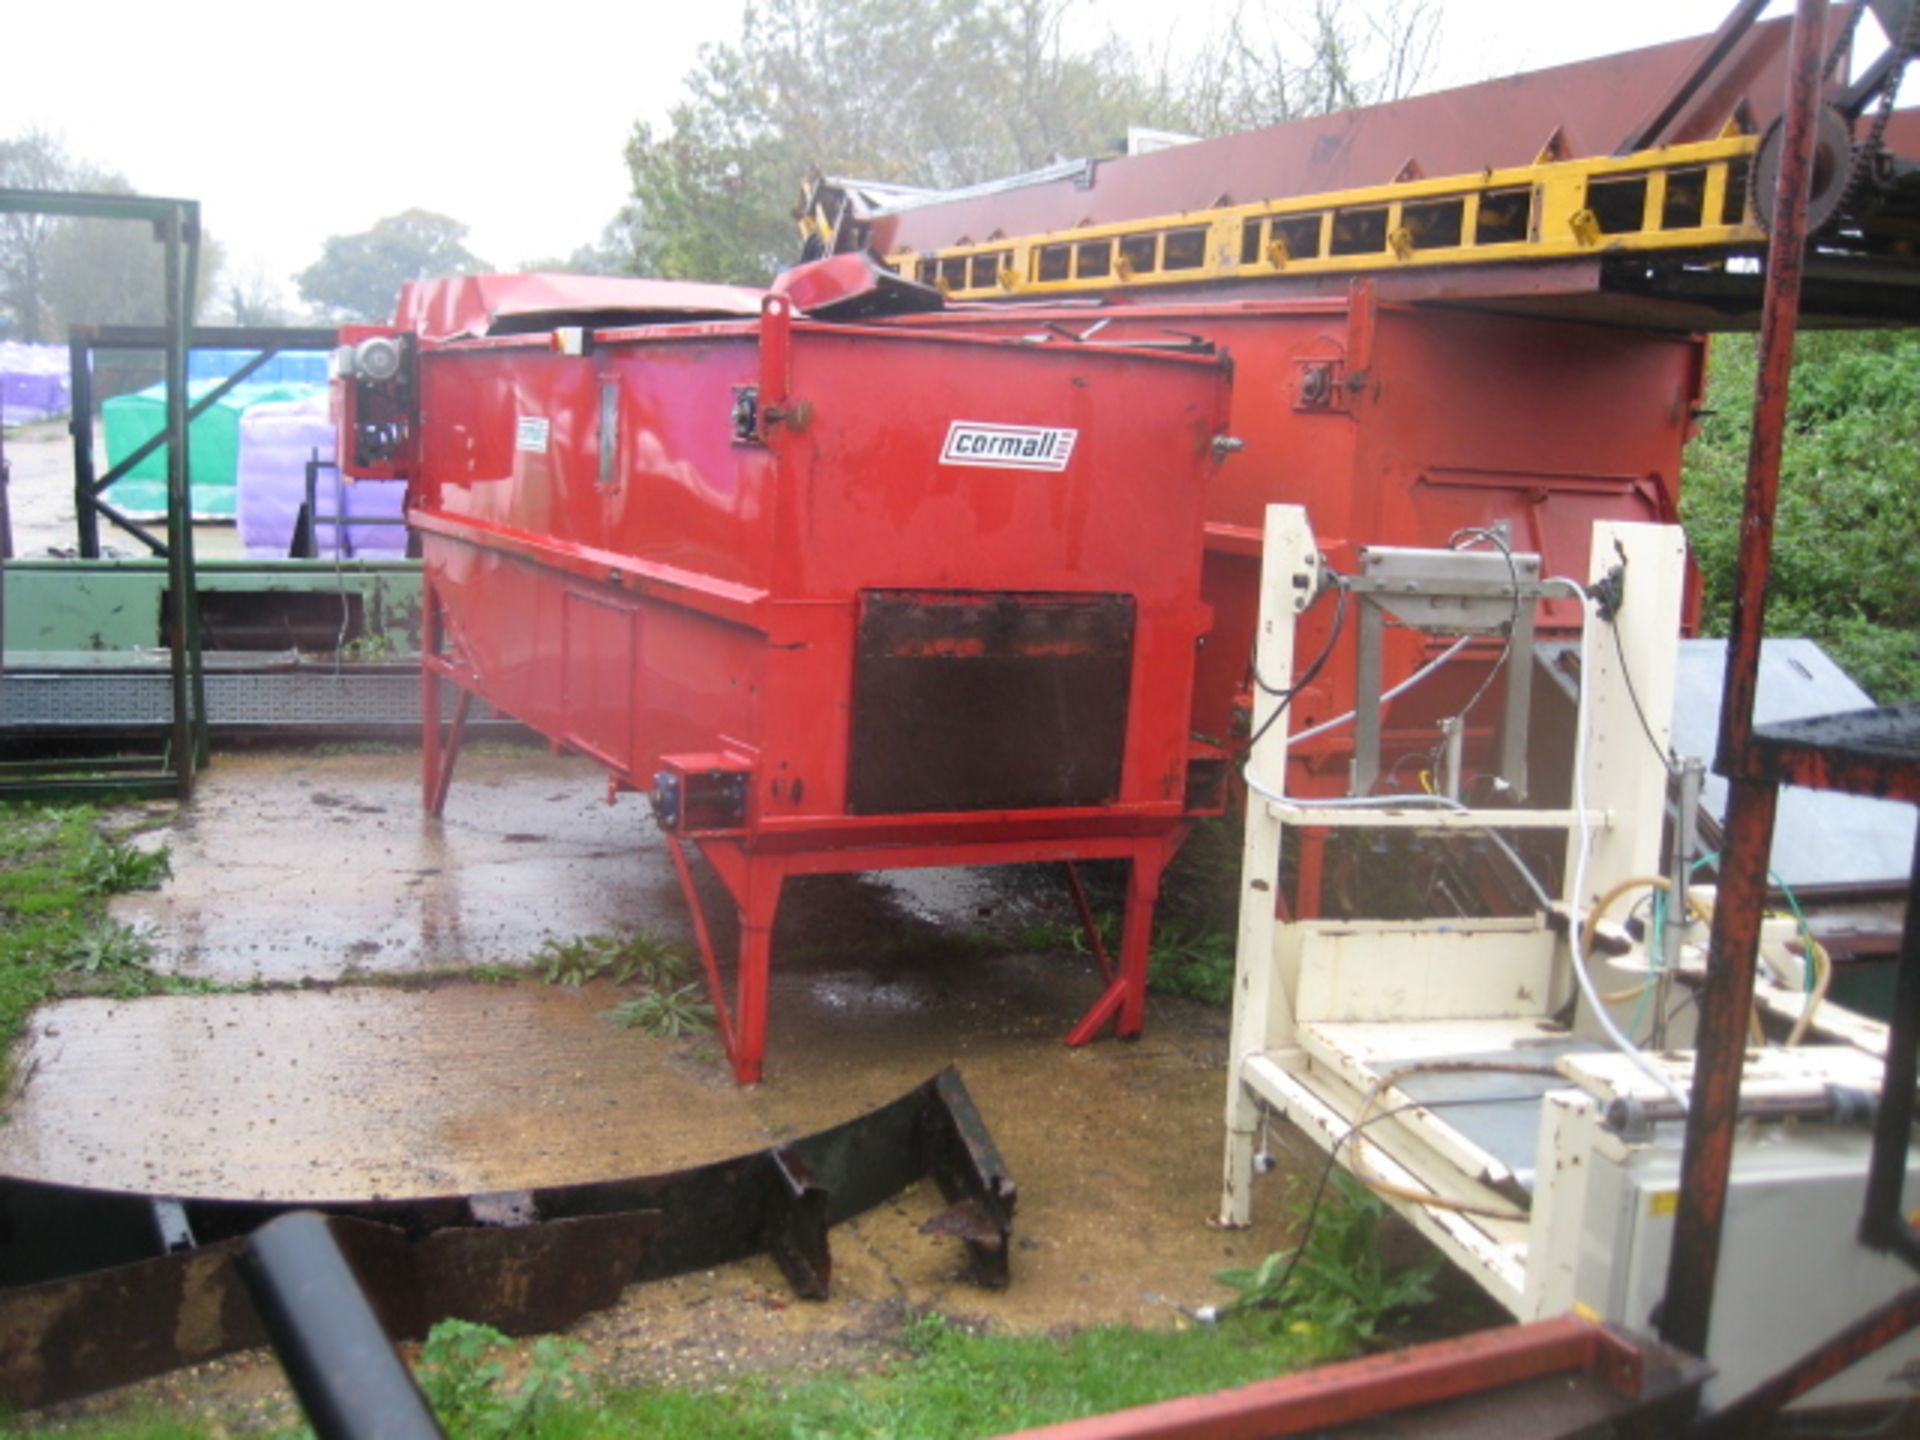 Mixer - Cormall chain and slat mixers. (2 remaining) (UCPE 6342) Price - £1,500 each. Please read - Image 2 of 2